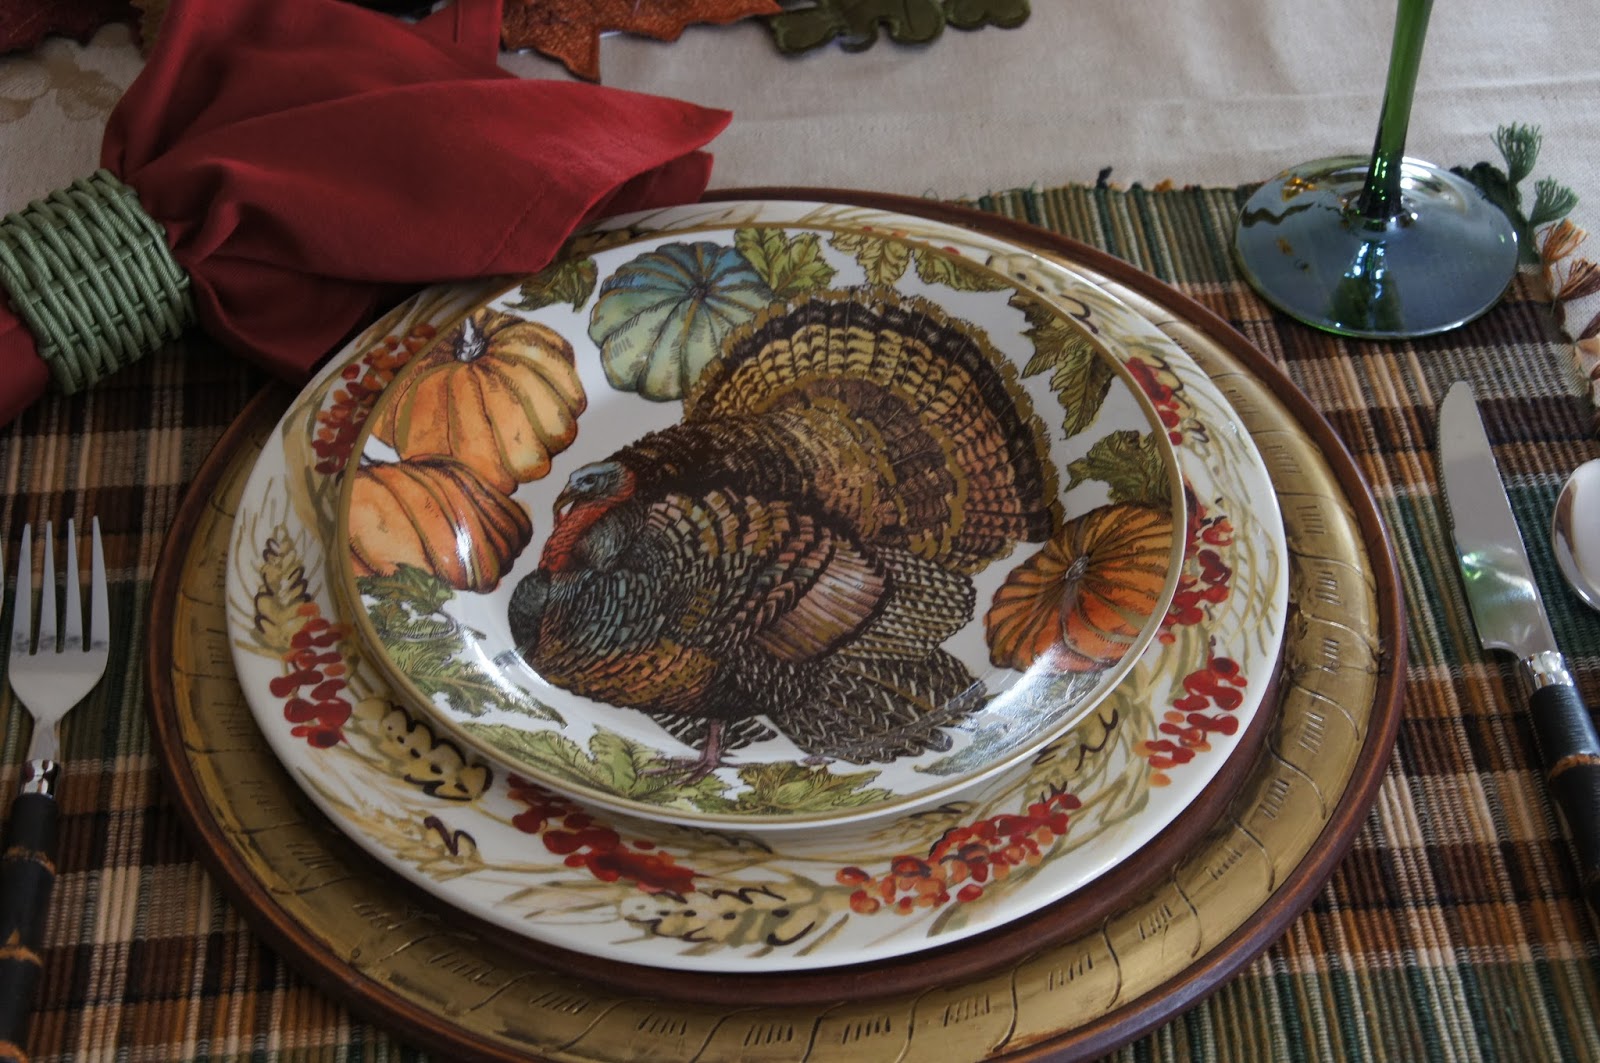 Home and Gardening With Liz: Dining for Thanksgiving